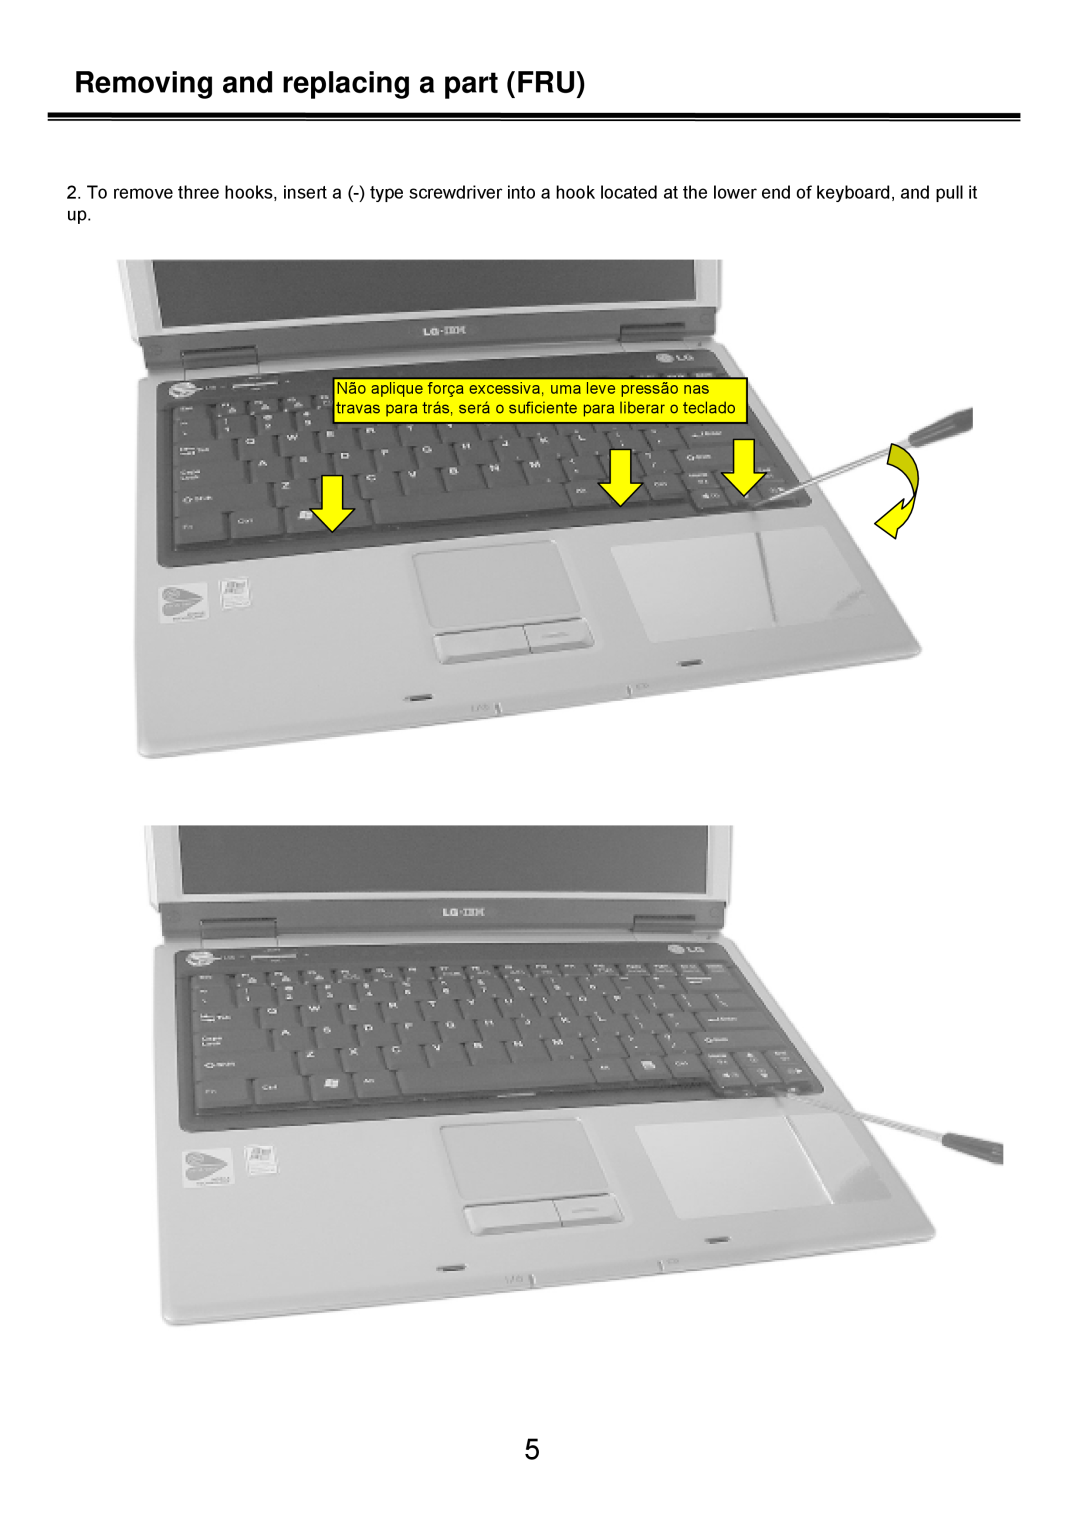 LG Electronics LS50 service manual Removing and replacing a part FRU 